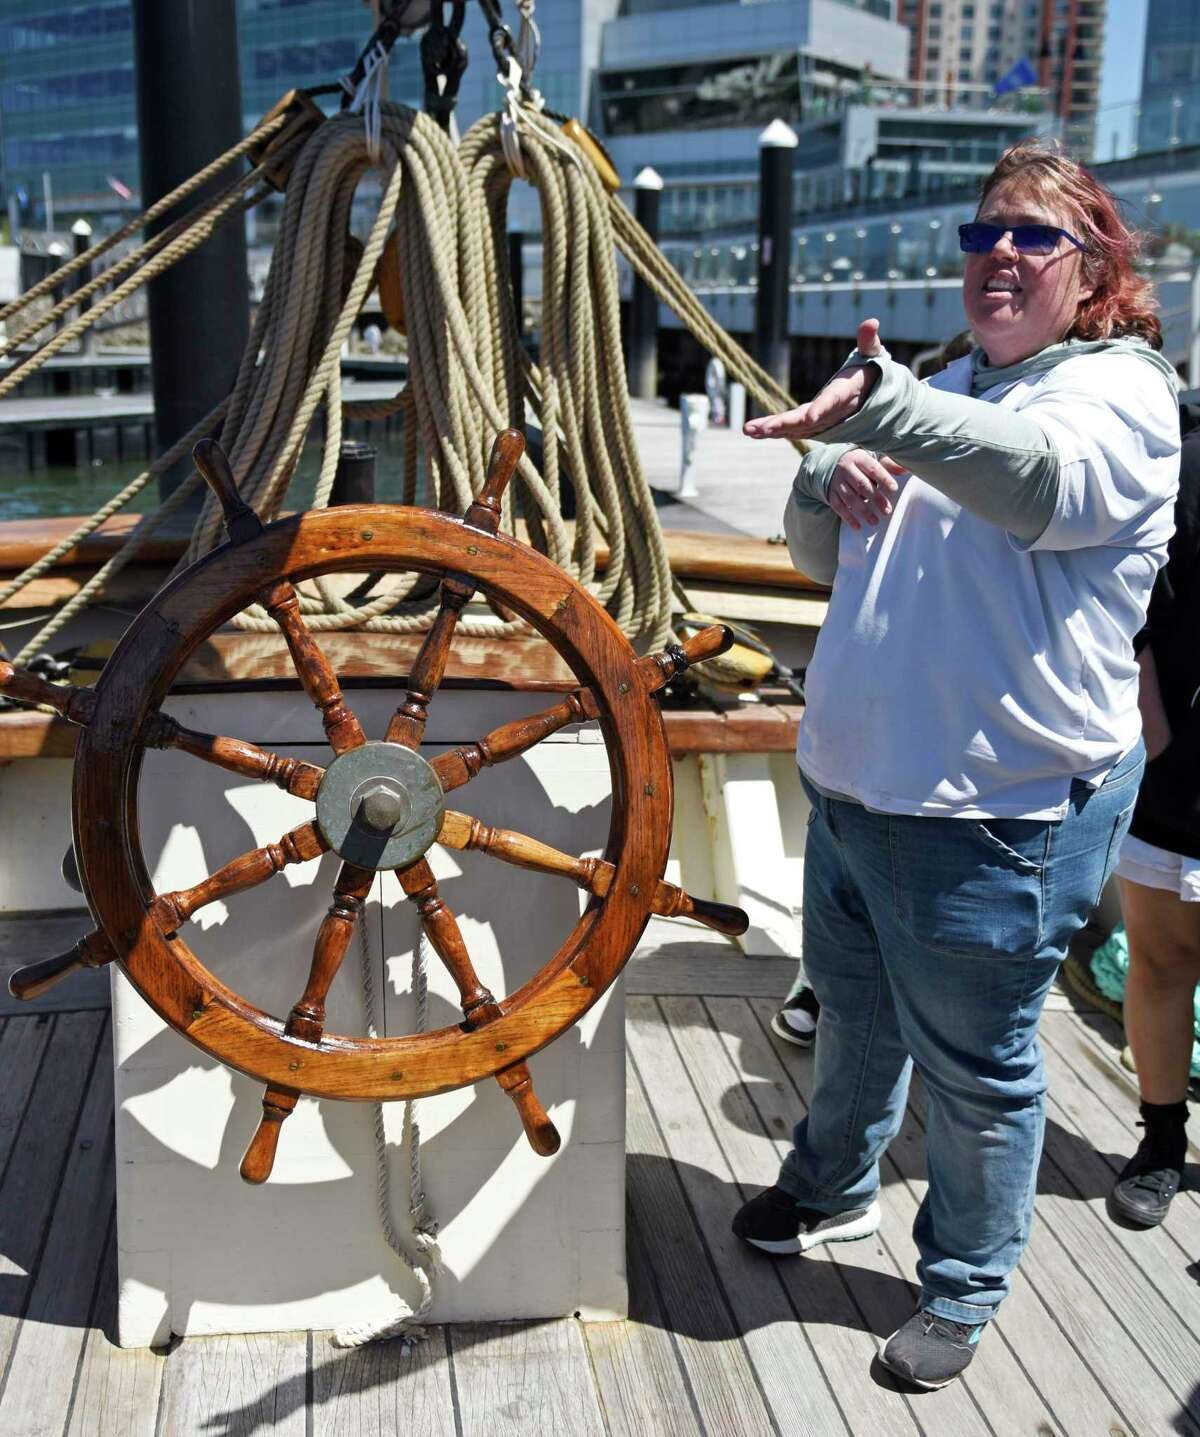  Discover Amistad educator Heidi Slaney tells students the history of the Amistad uprising aboard a reproduction of the ship docked at Harbor Point in Stamford, Conn. Monday, May 9, 2022. Eighth grade students toured the ship to kick off the new part